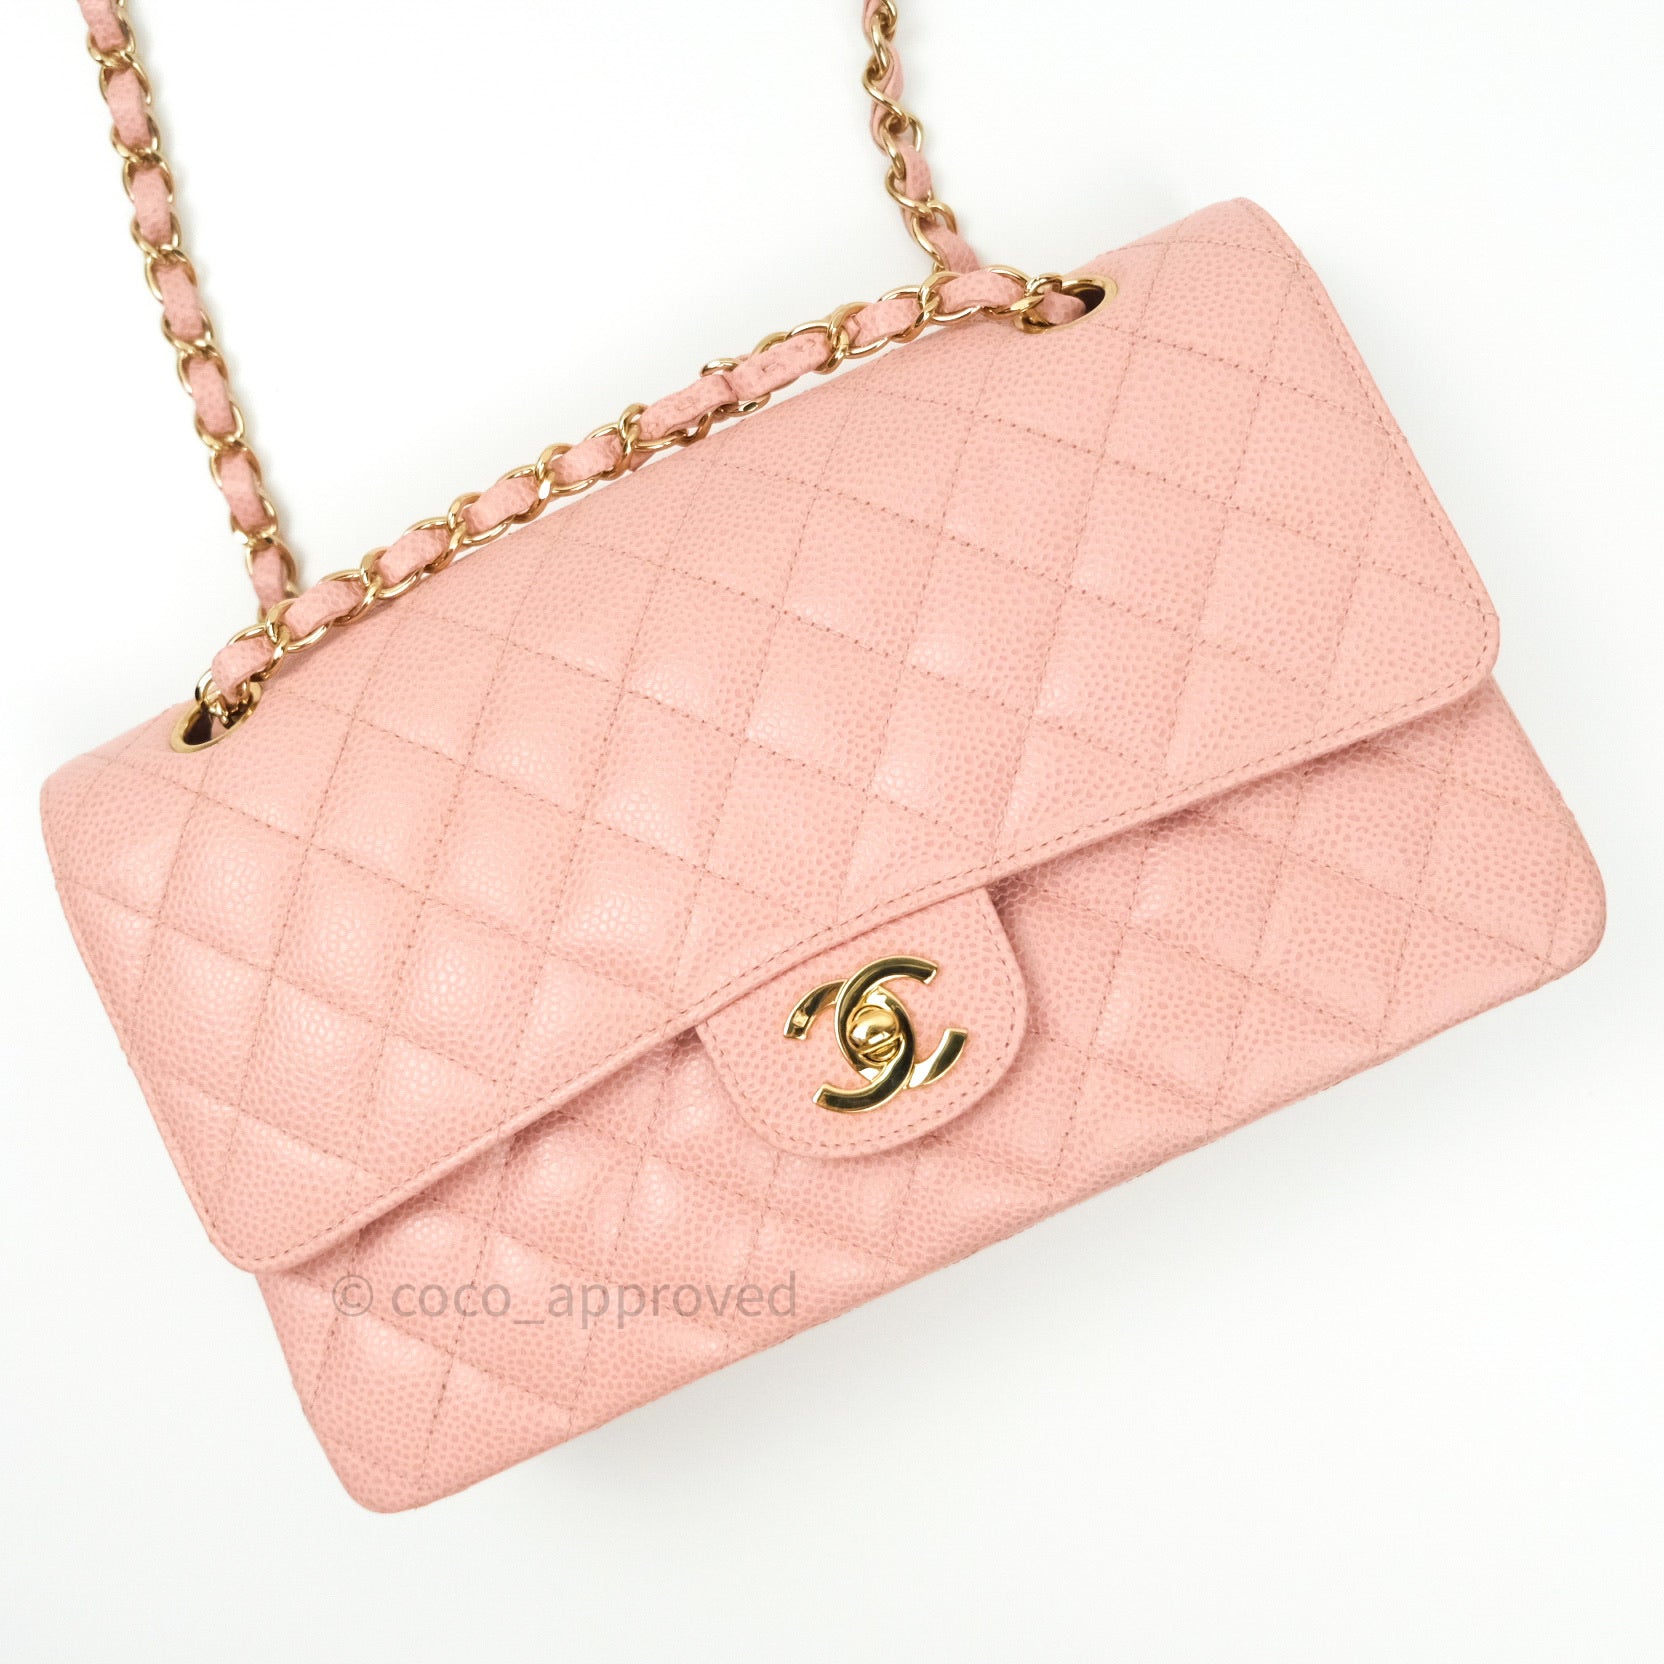 cost of chanel classic flap bag